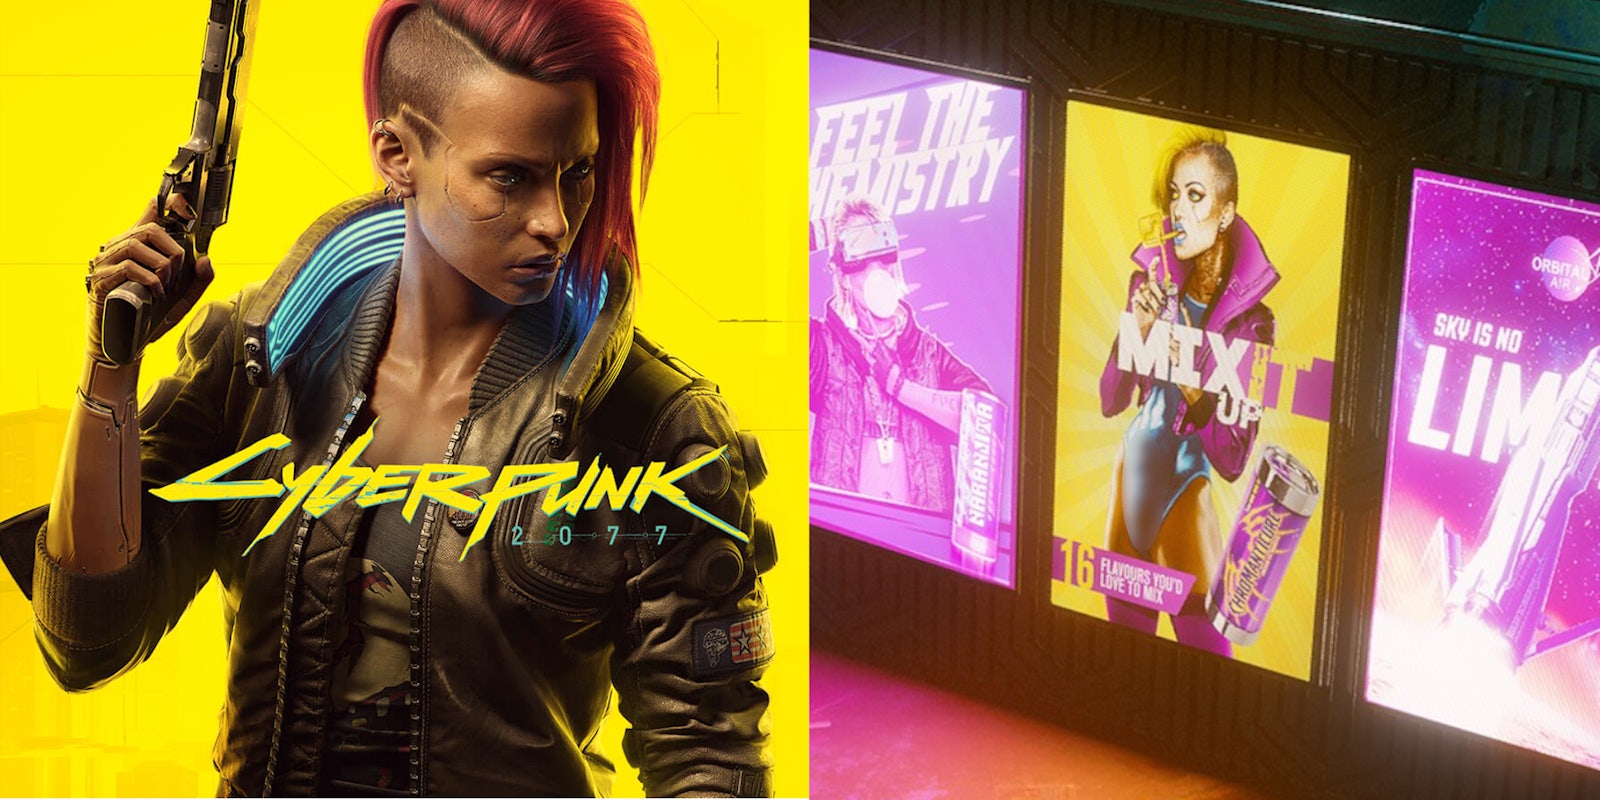 A side-by-side comparison of the Cyberpunk 2077 cover and the controversial 'Chromanticore' in-game trans model.